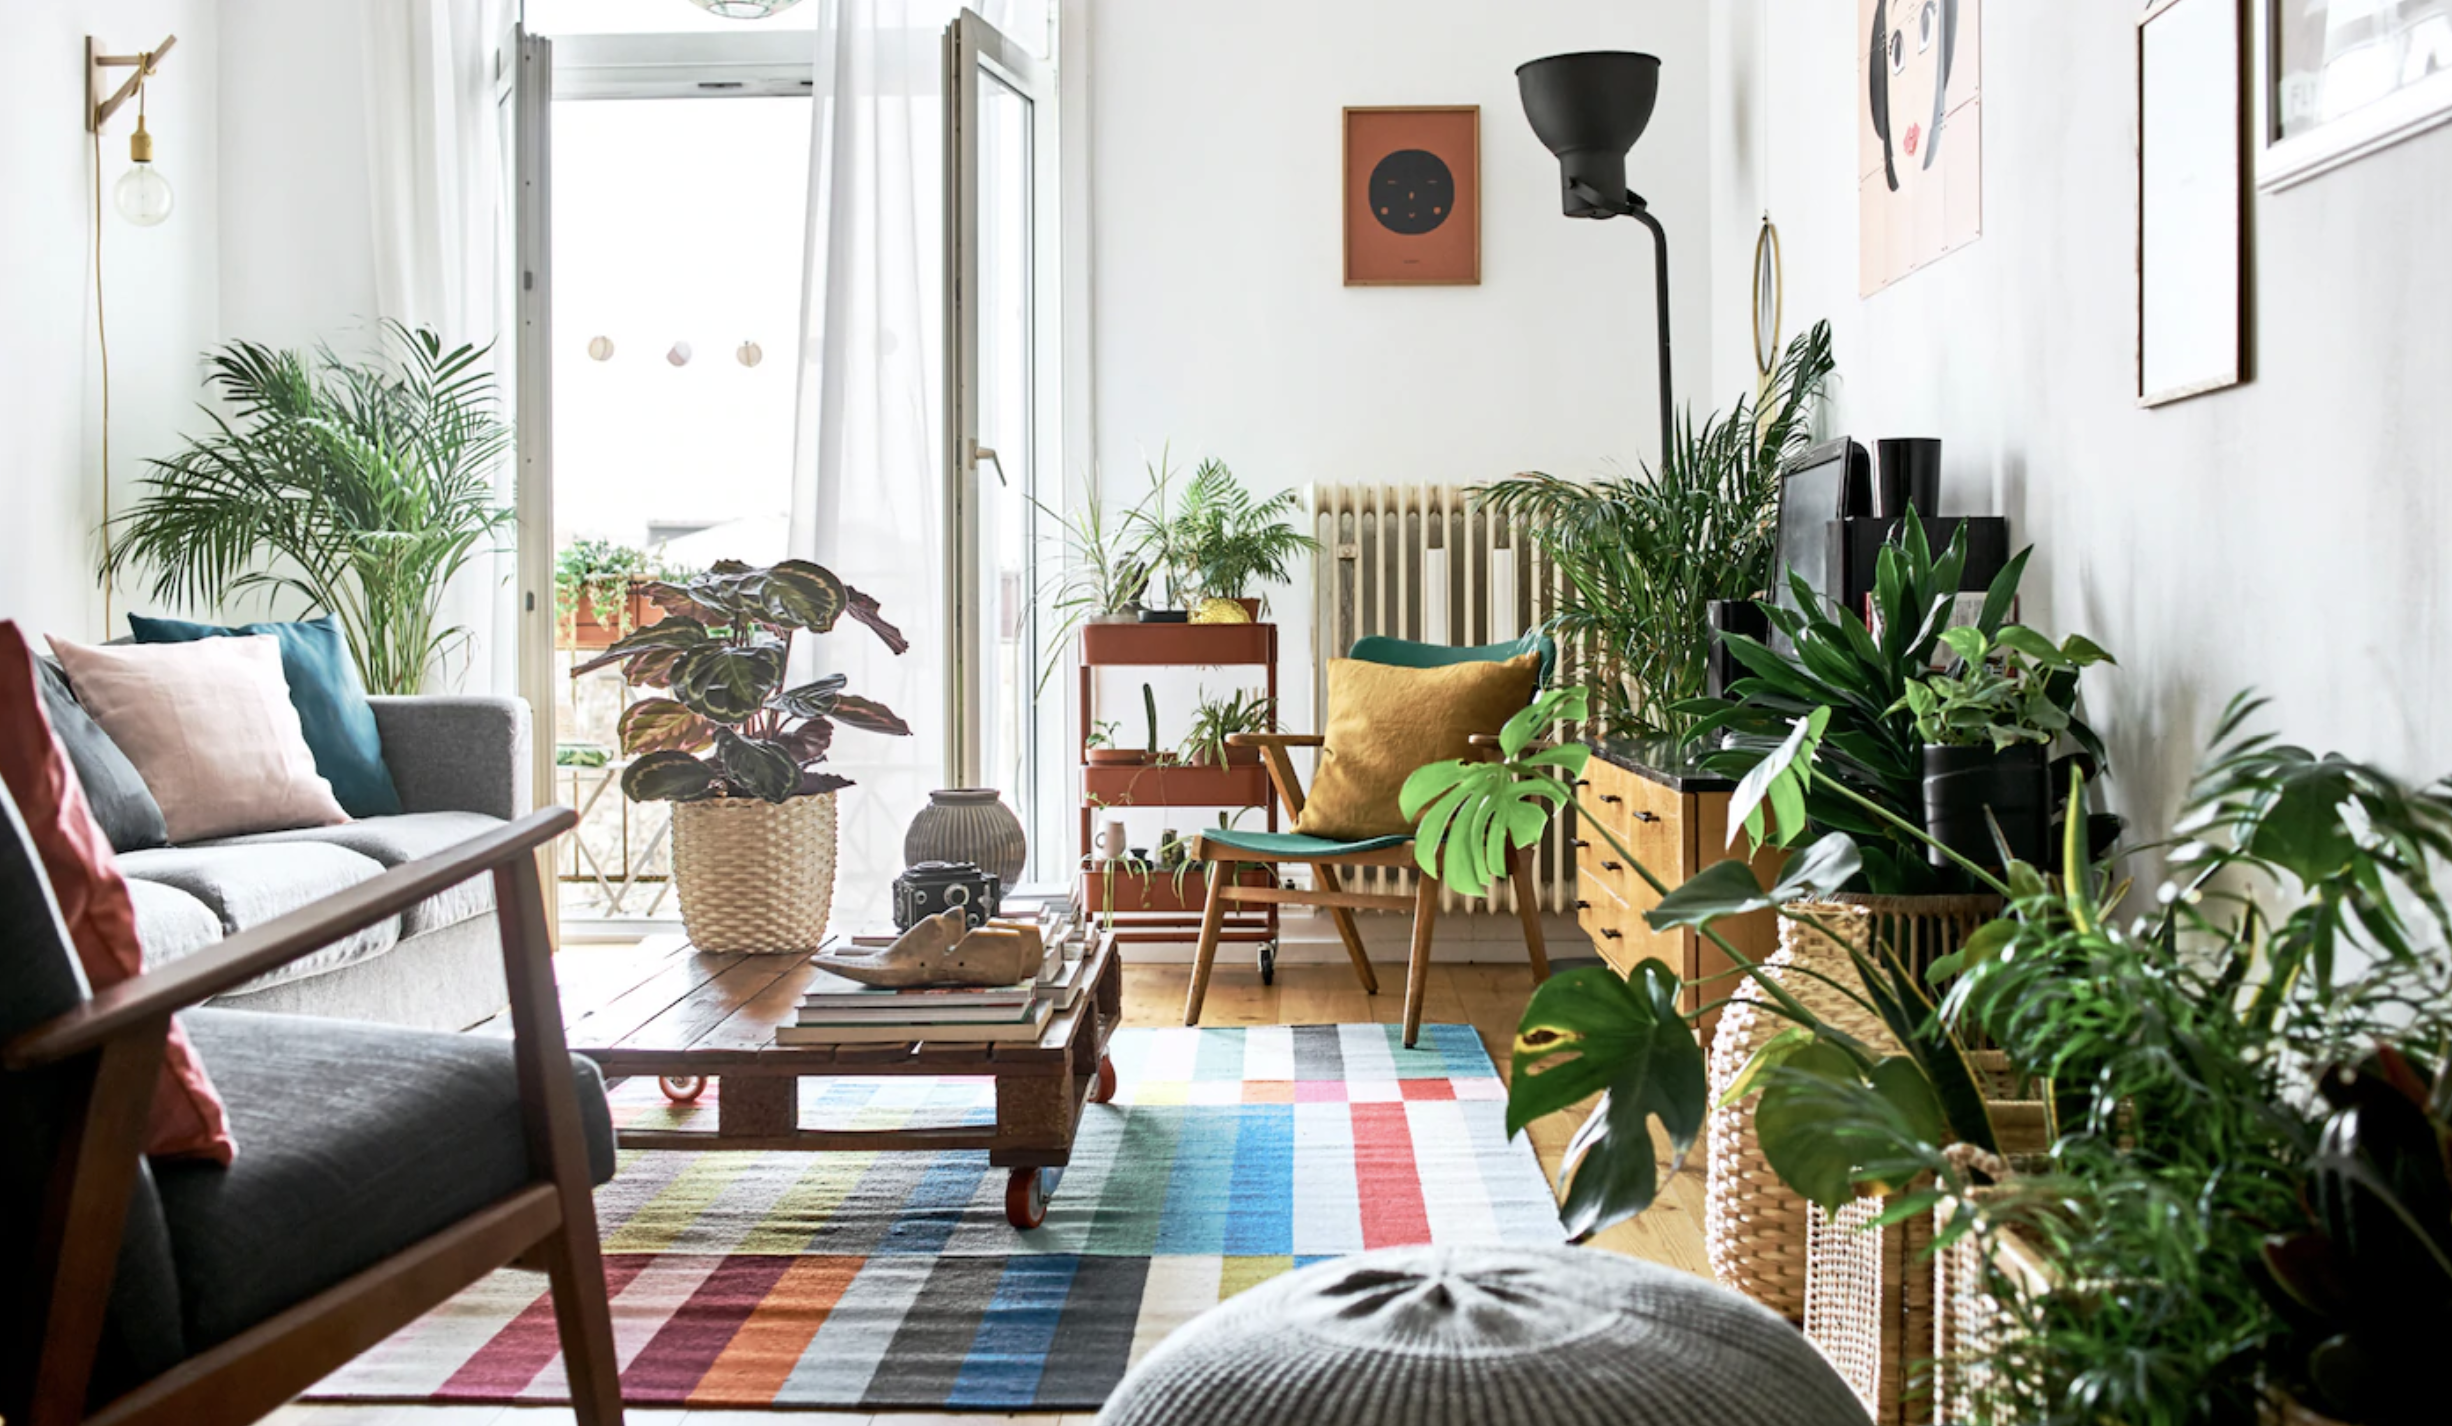 20 living room ideas on a budget to update your space for less